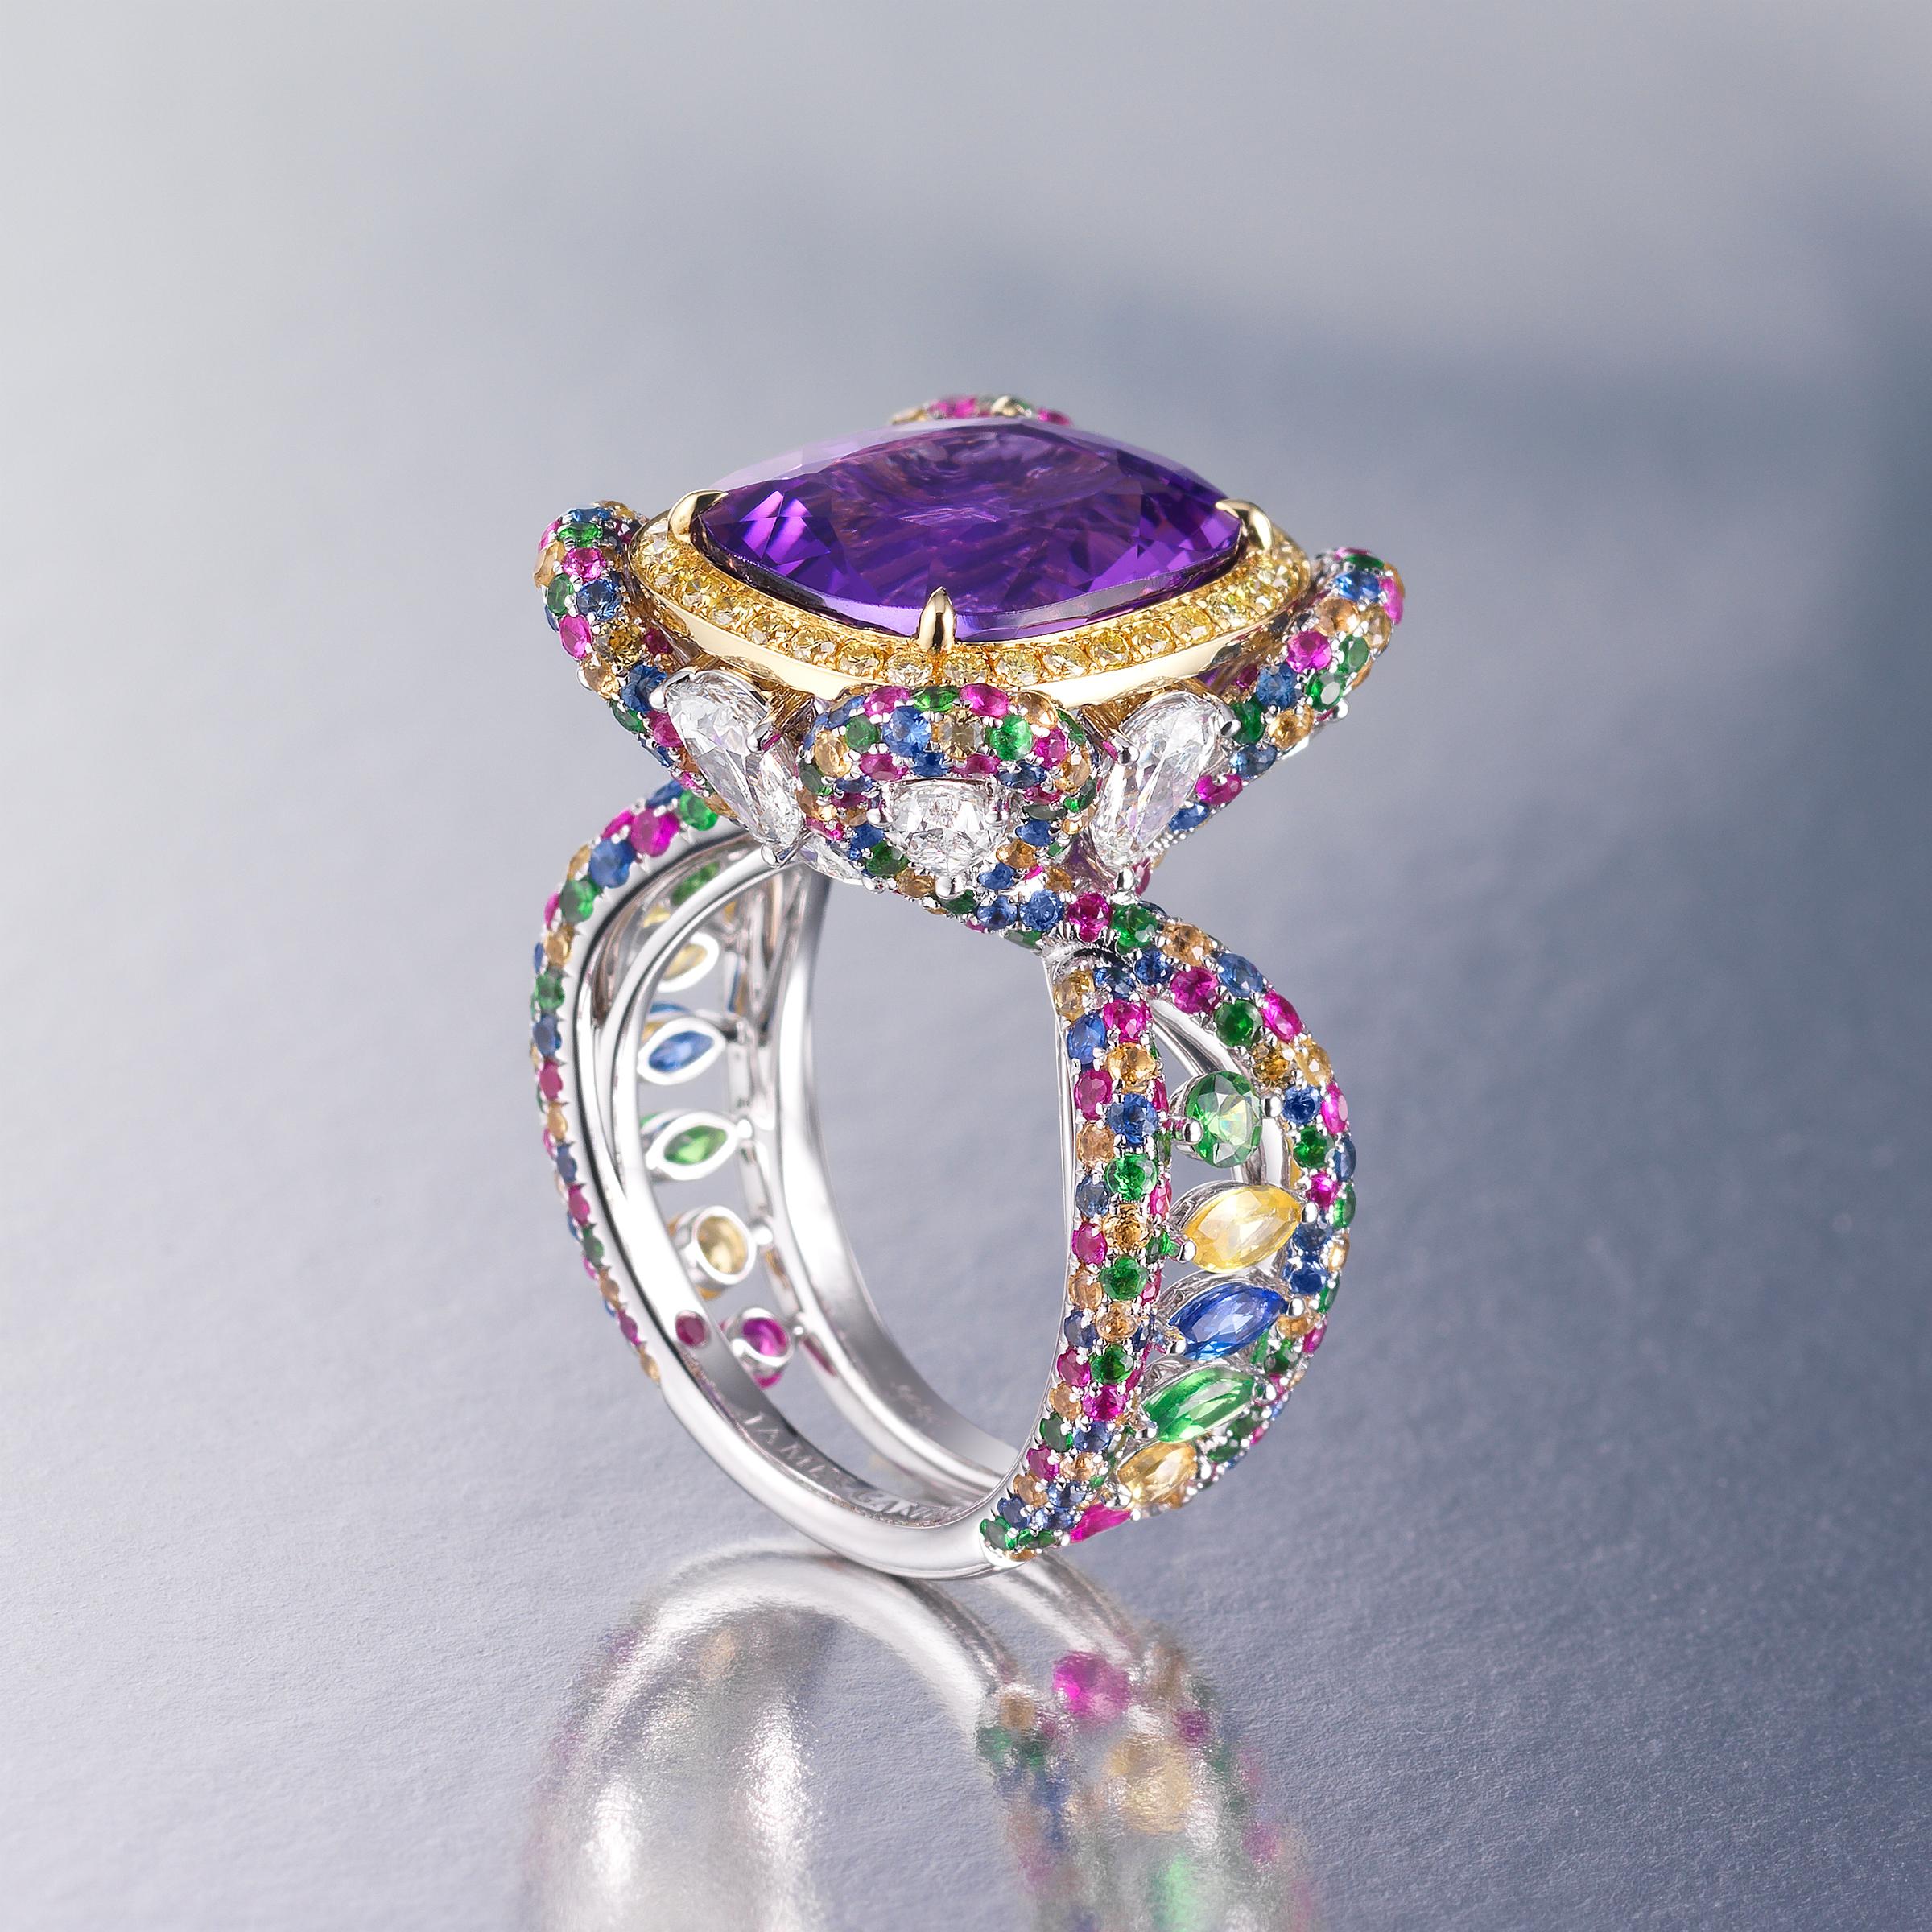 Sublime cocktail ring by James Ganh, London high-jewelry designer who is currently designing the high-jewelry collection for famed Faberge. He is known as the jewelry architect due to his highly intricate designs that have architectural precision,